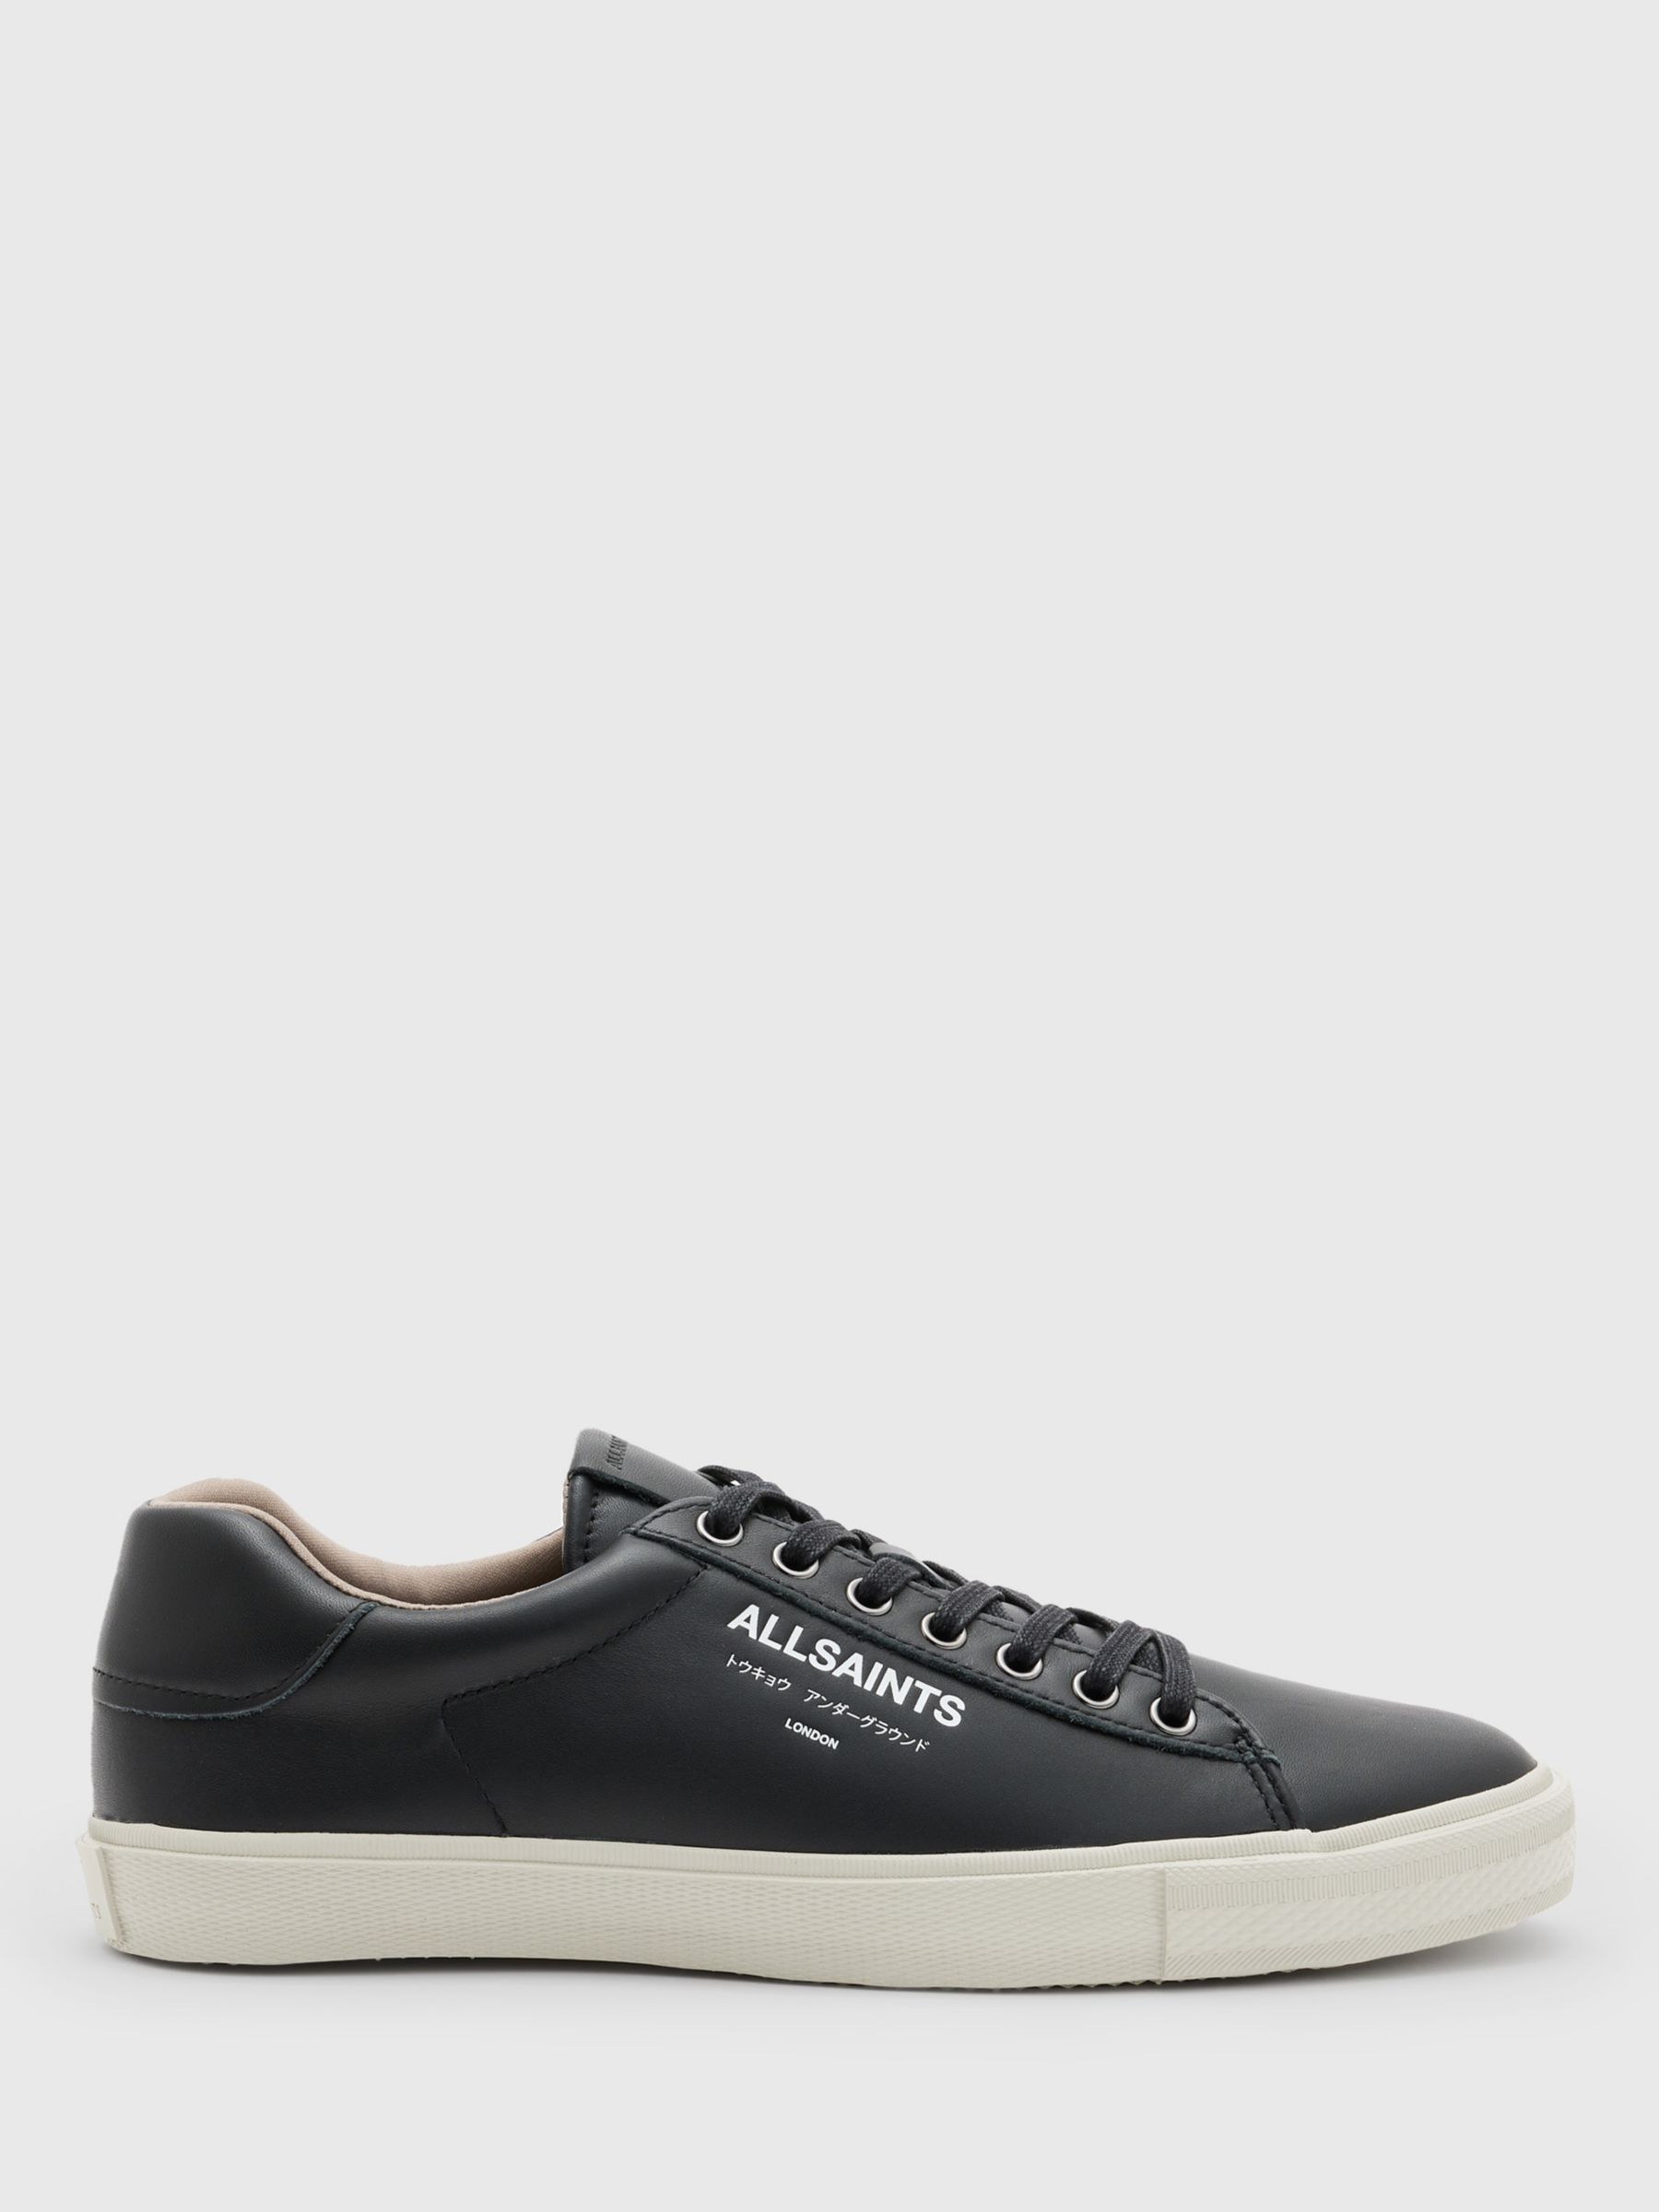 AllSaints Underground Leather Trainers, Black at John Lewis & Partners